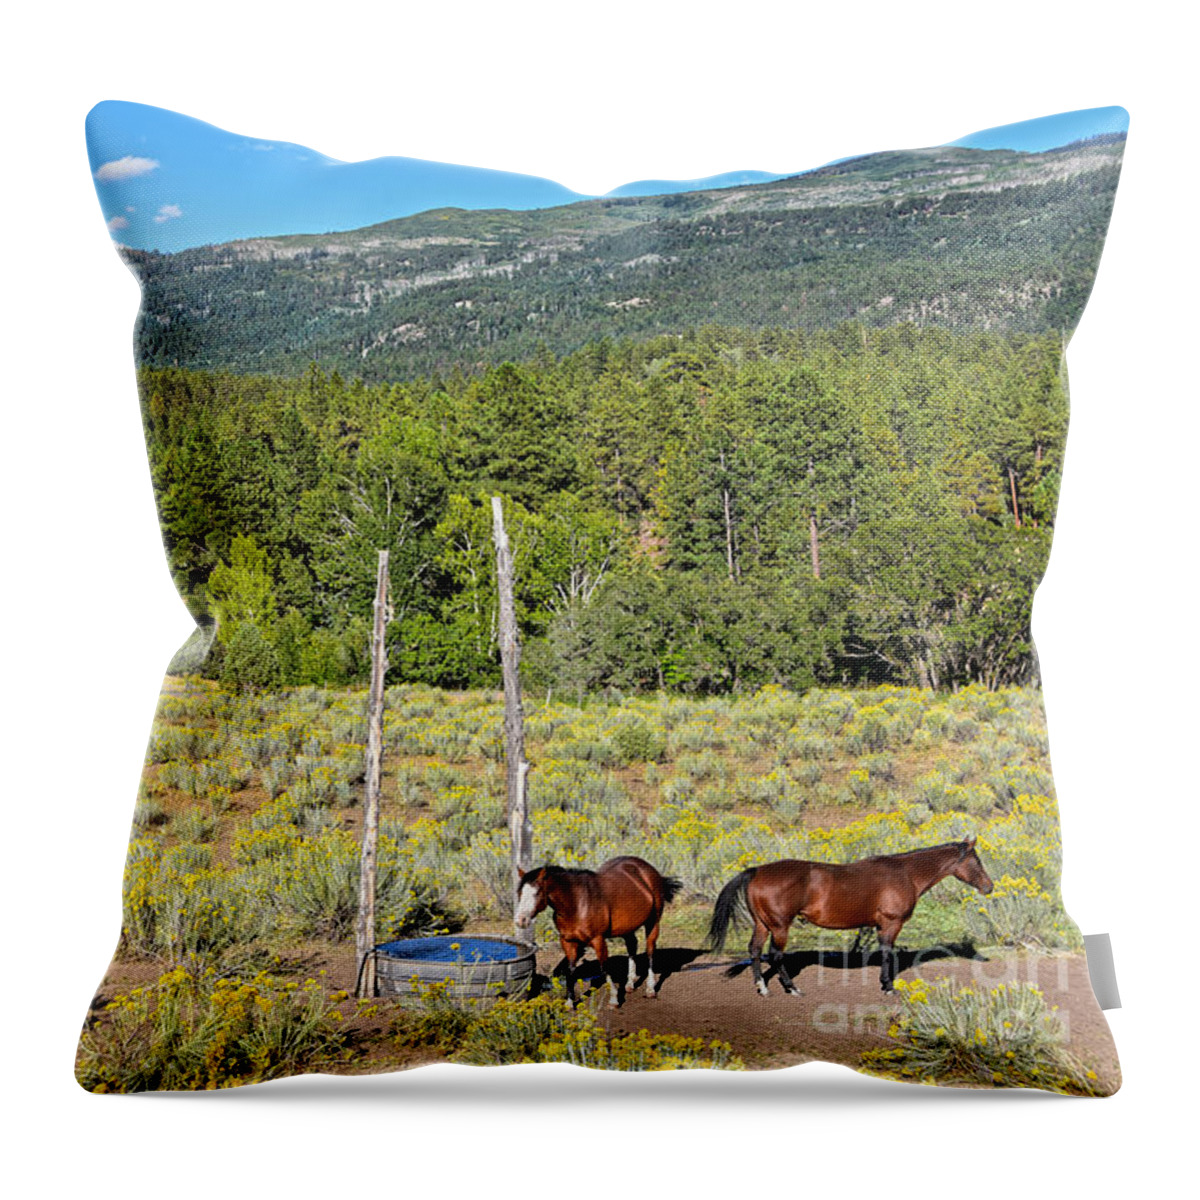 Horses Throw Pillow featuring the photograph Two Horses in Rabbitbrush by Catherine Sherman